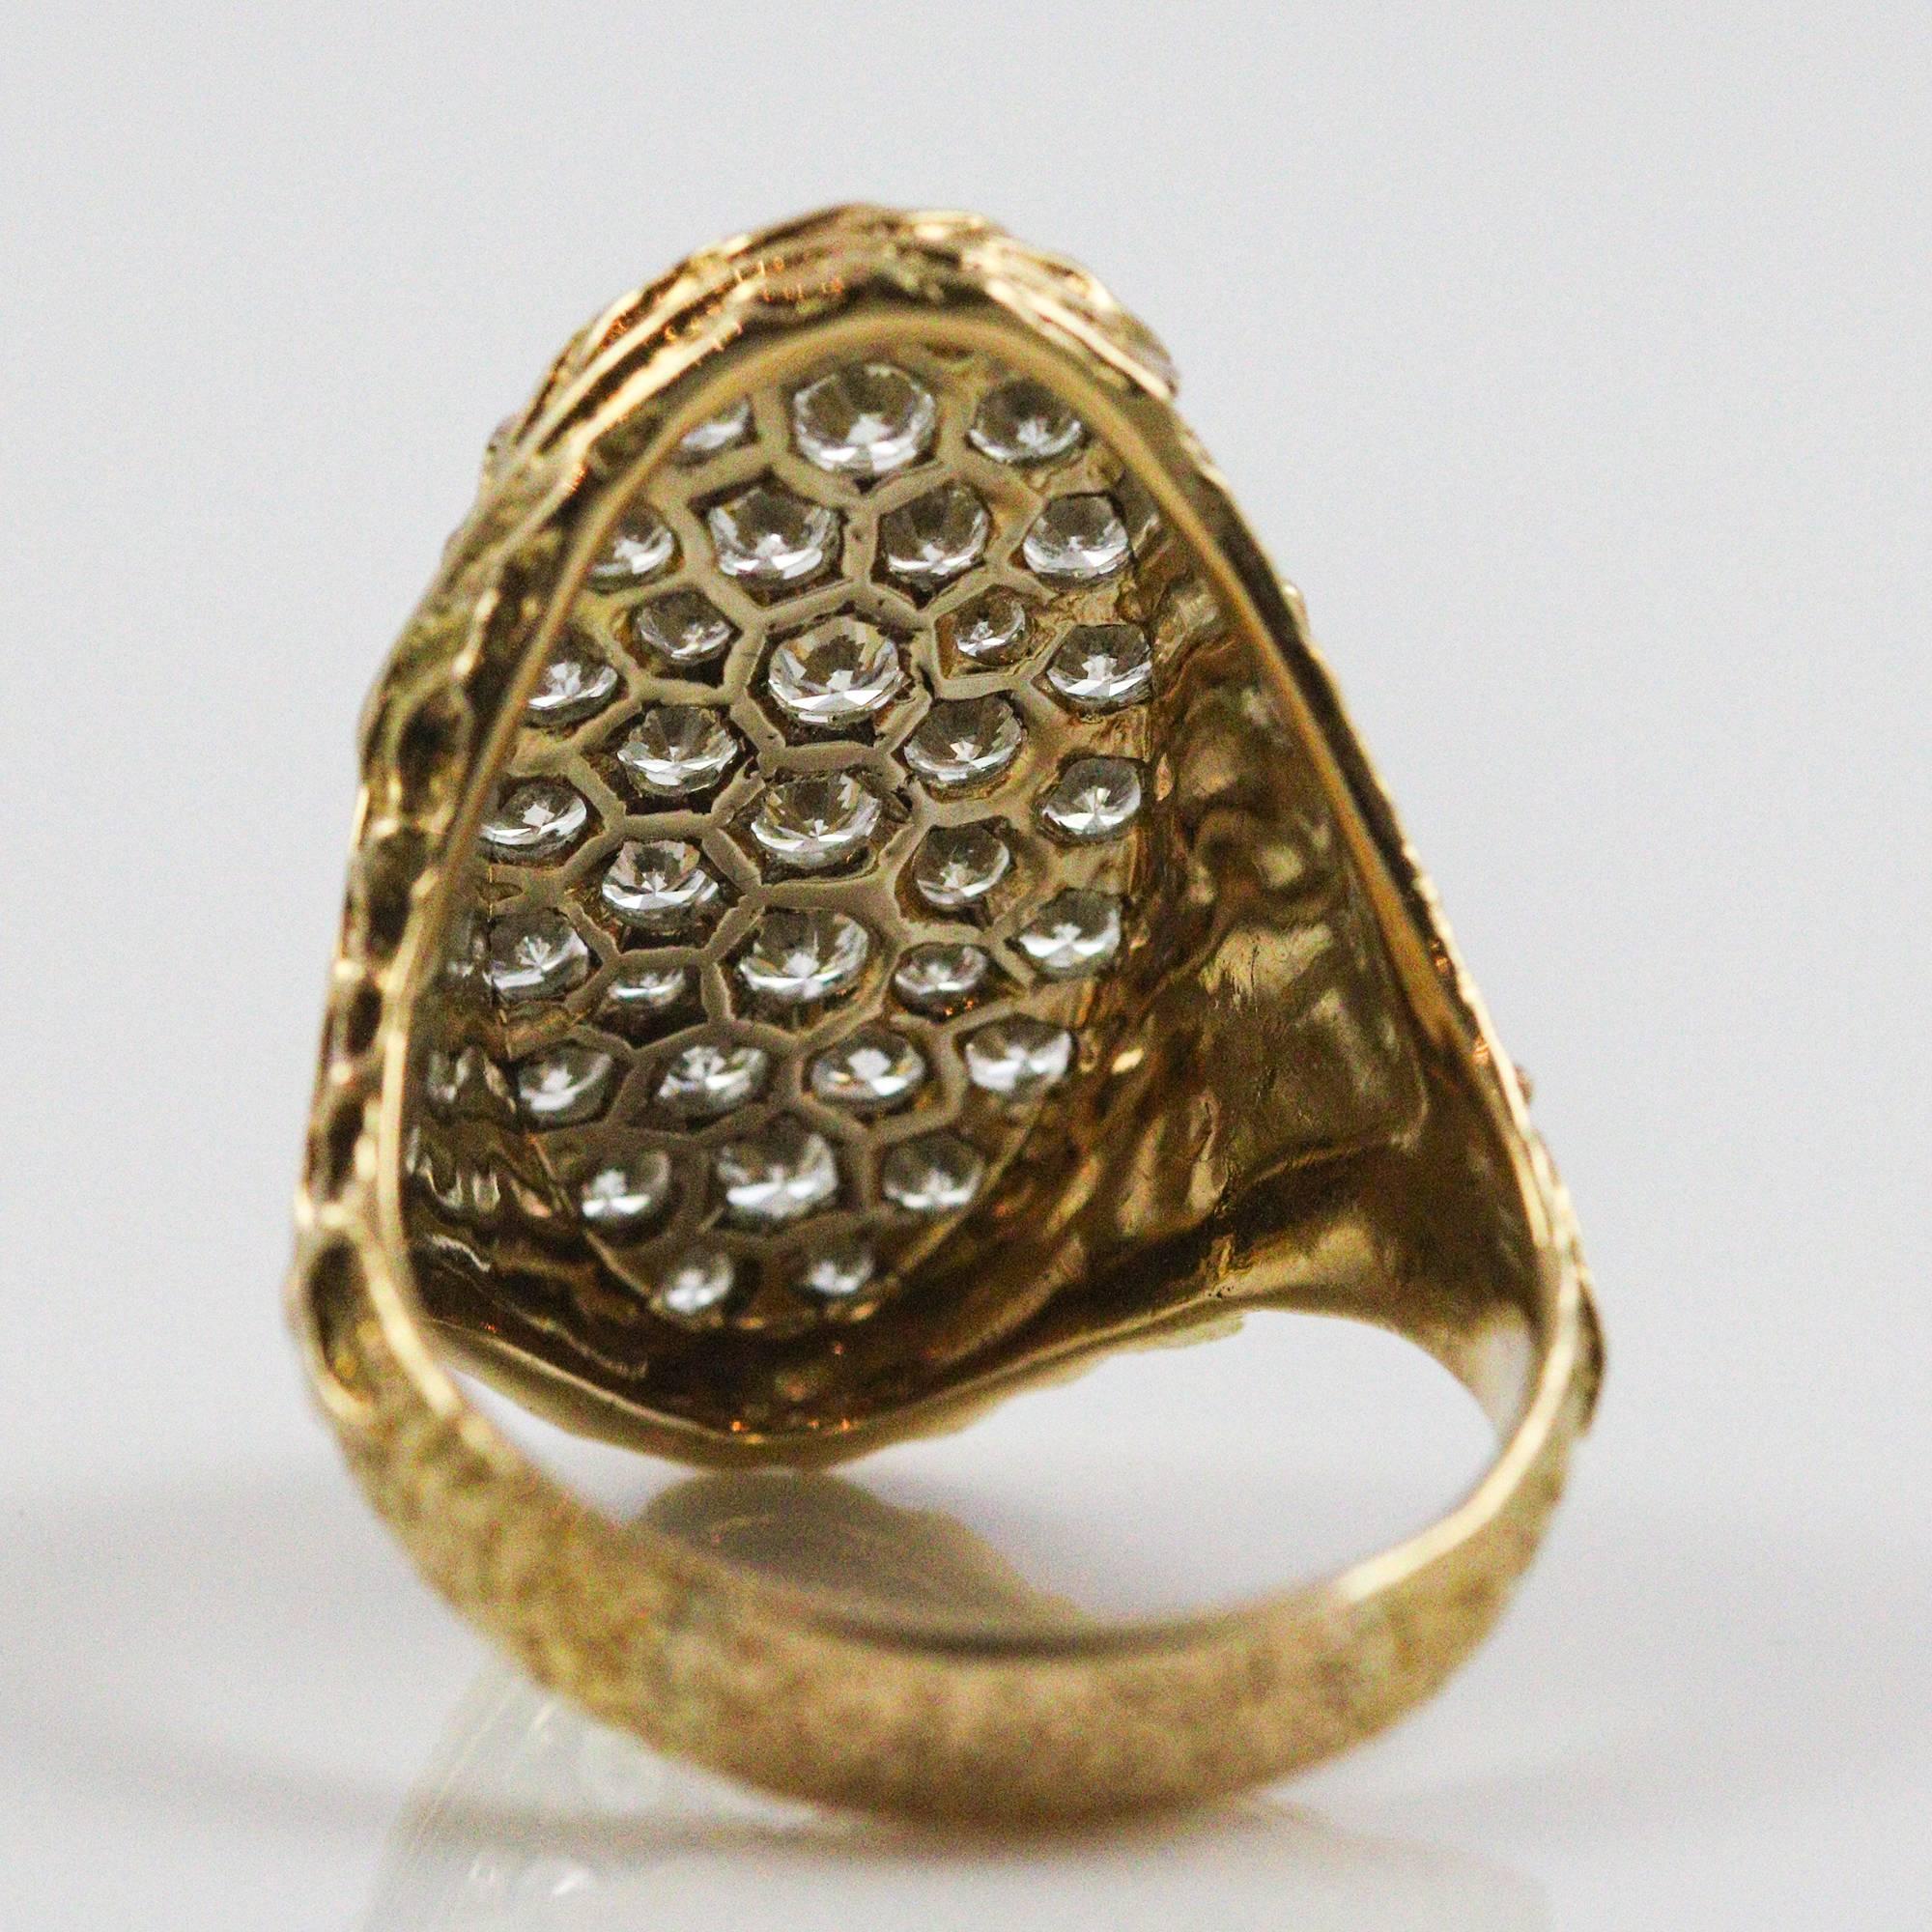 Men's Owned by Music Legend Issac Hayes, Modernist 18 Karat Gold and Diamond Ring